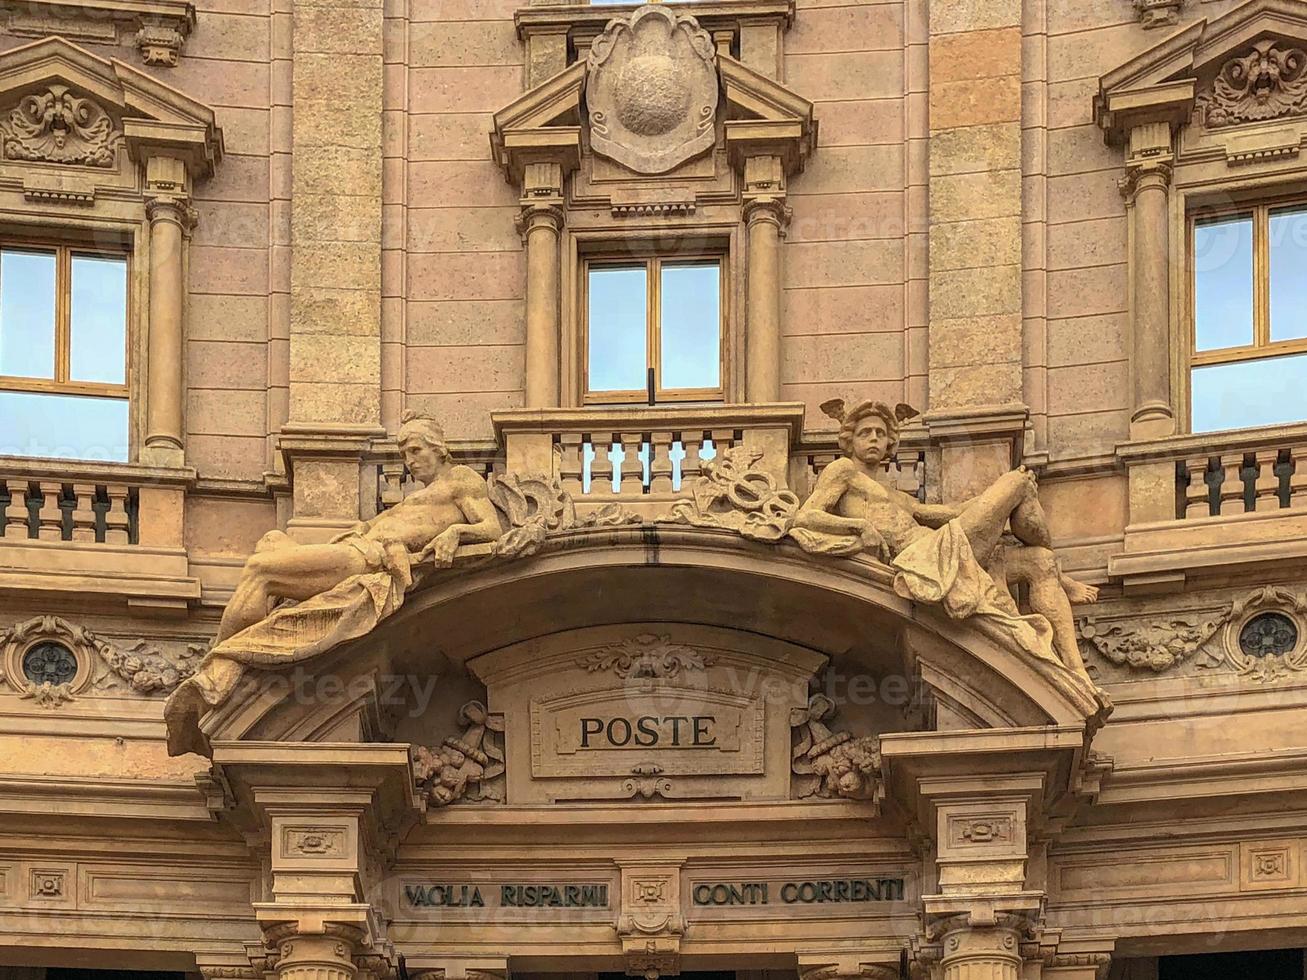 Cordusio square post office detail front entrance ornaments. It was the old stock exchange of Milan, Italy in the past. photo